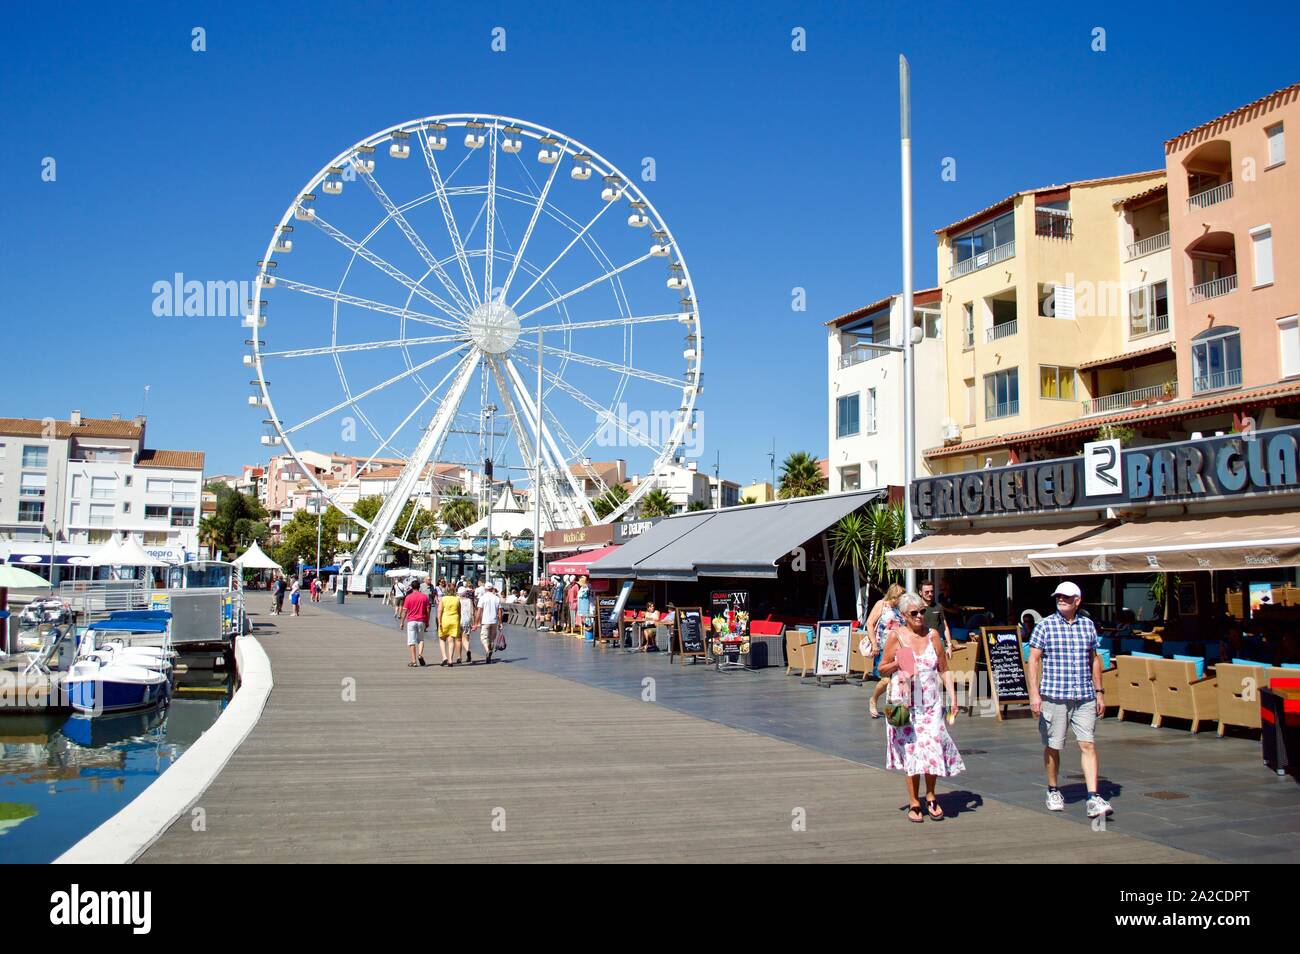 Restaurants and cafes in Cap d'Agde, France Stock Photo - Alamy